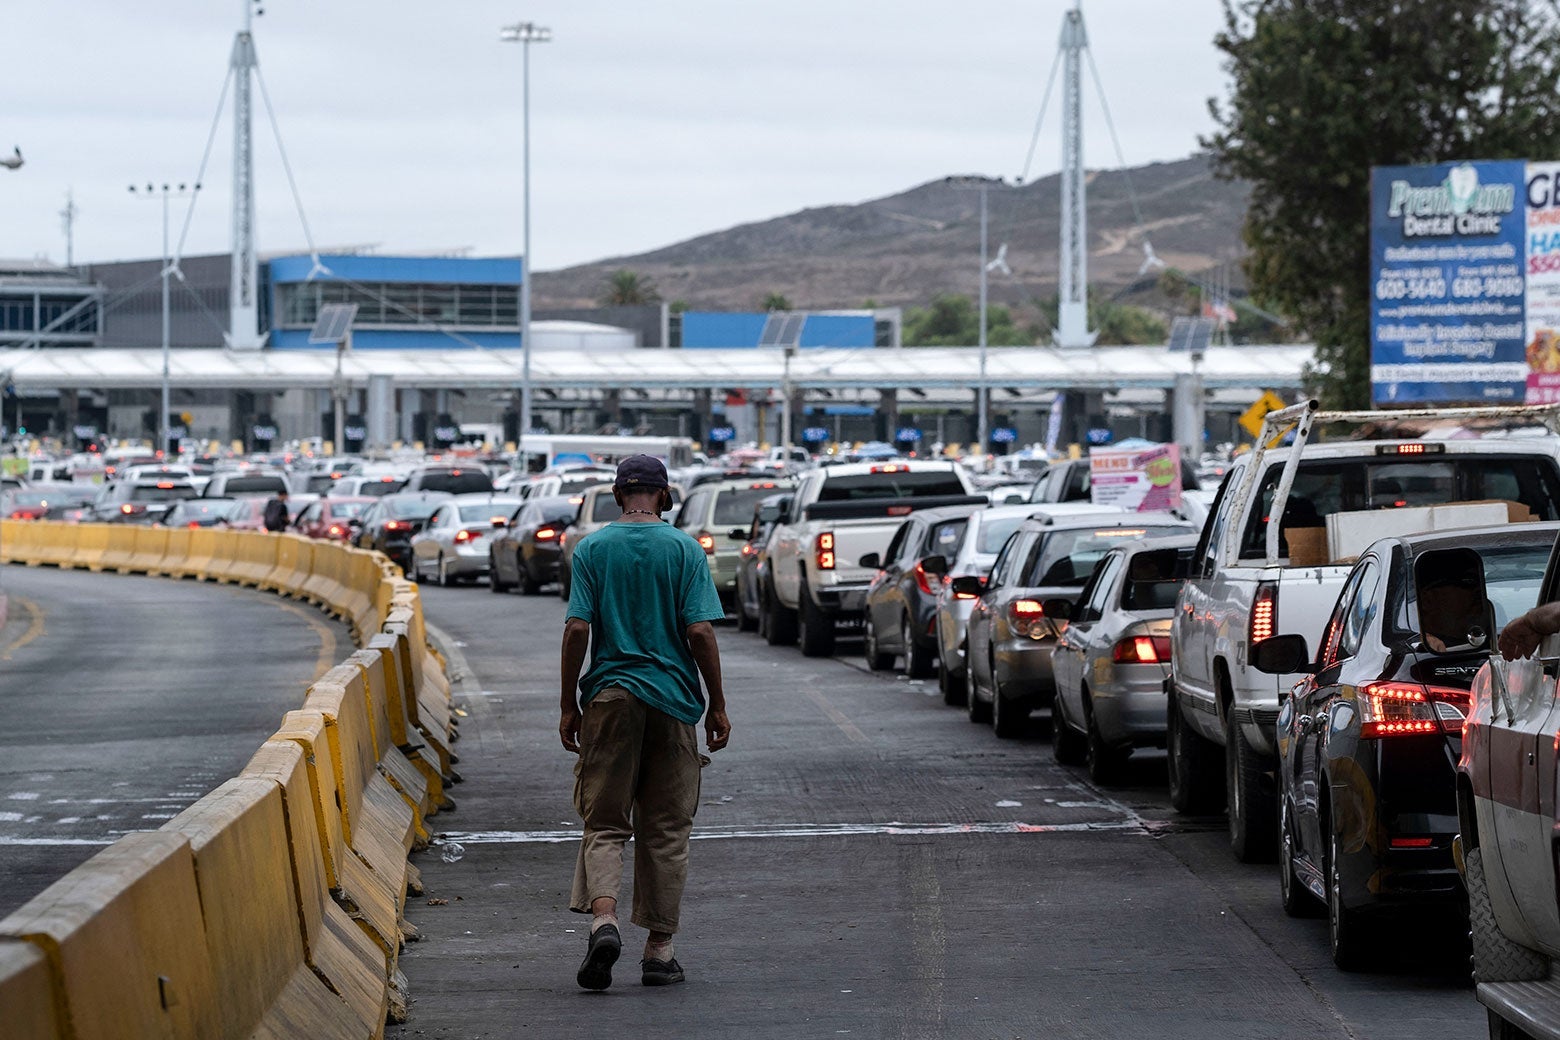 A man walks alone beside a line of cars stopped at the border crossing.